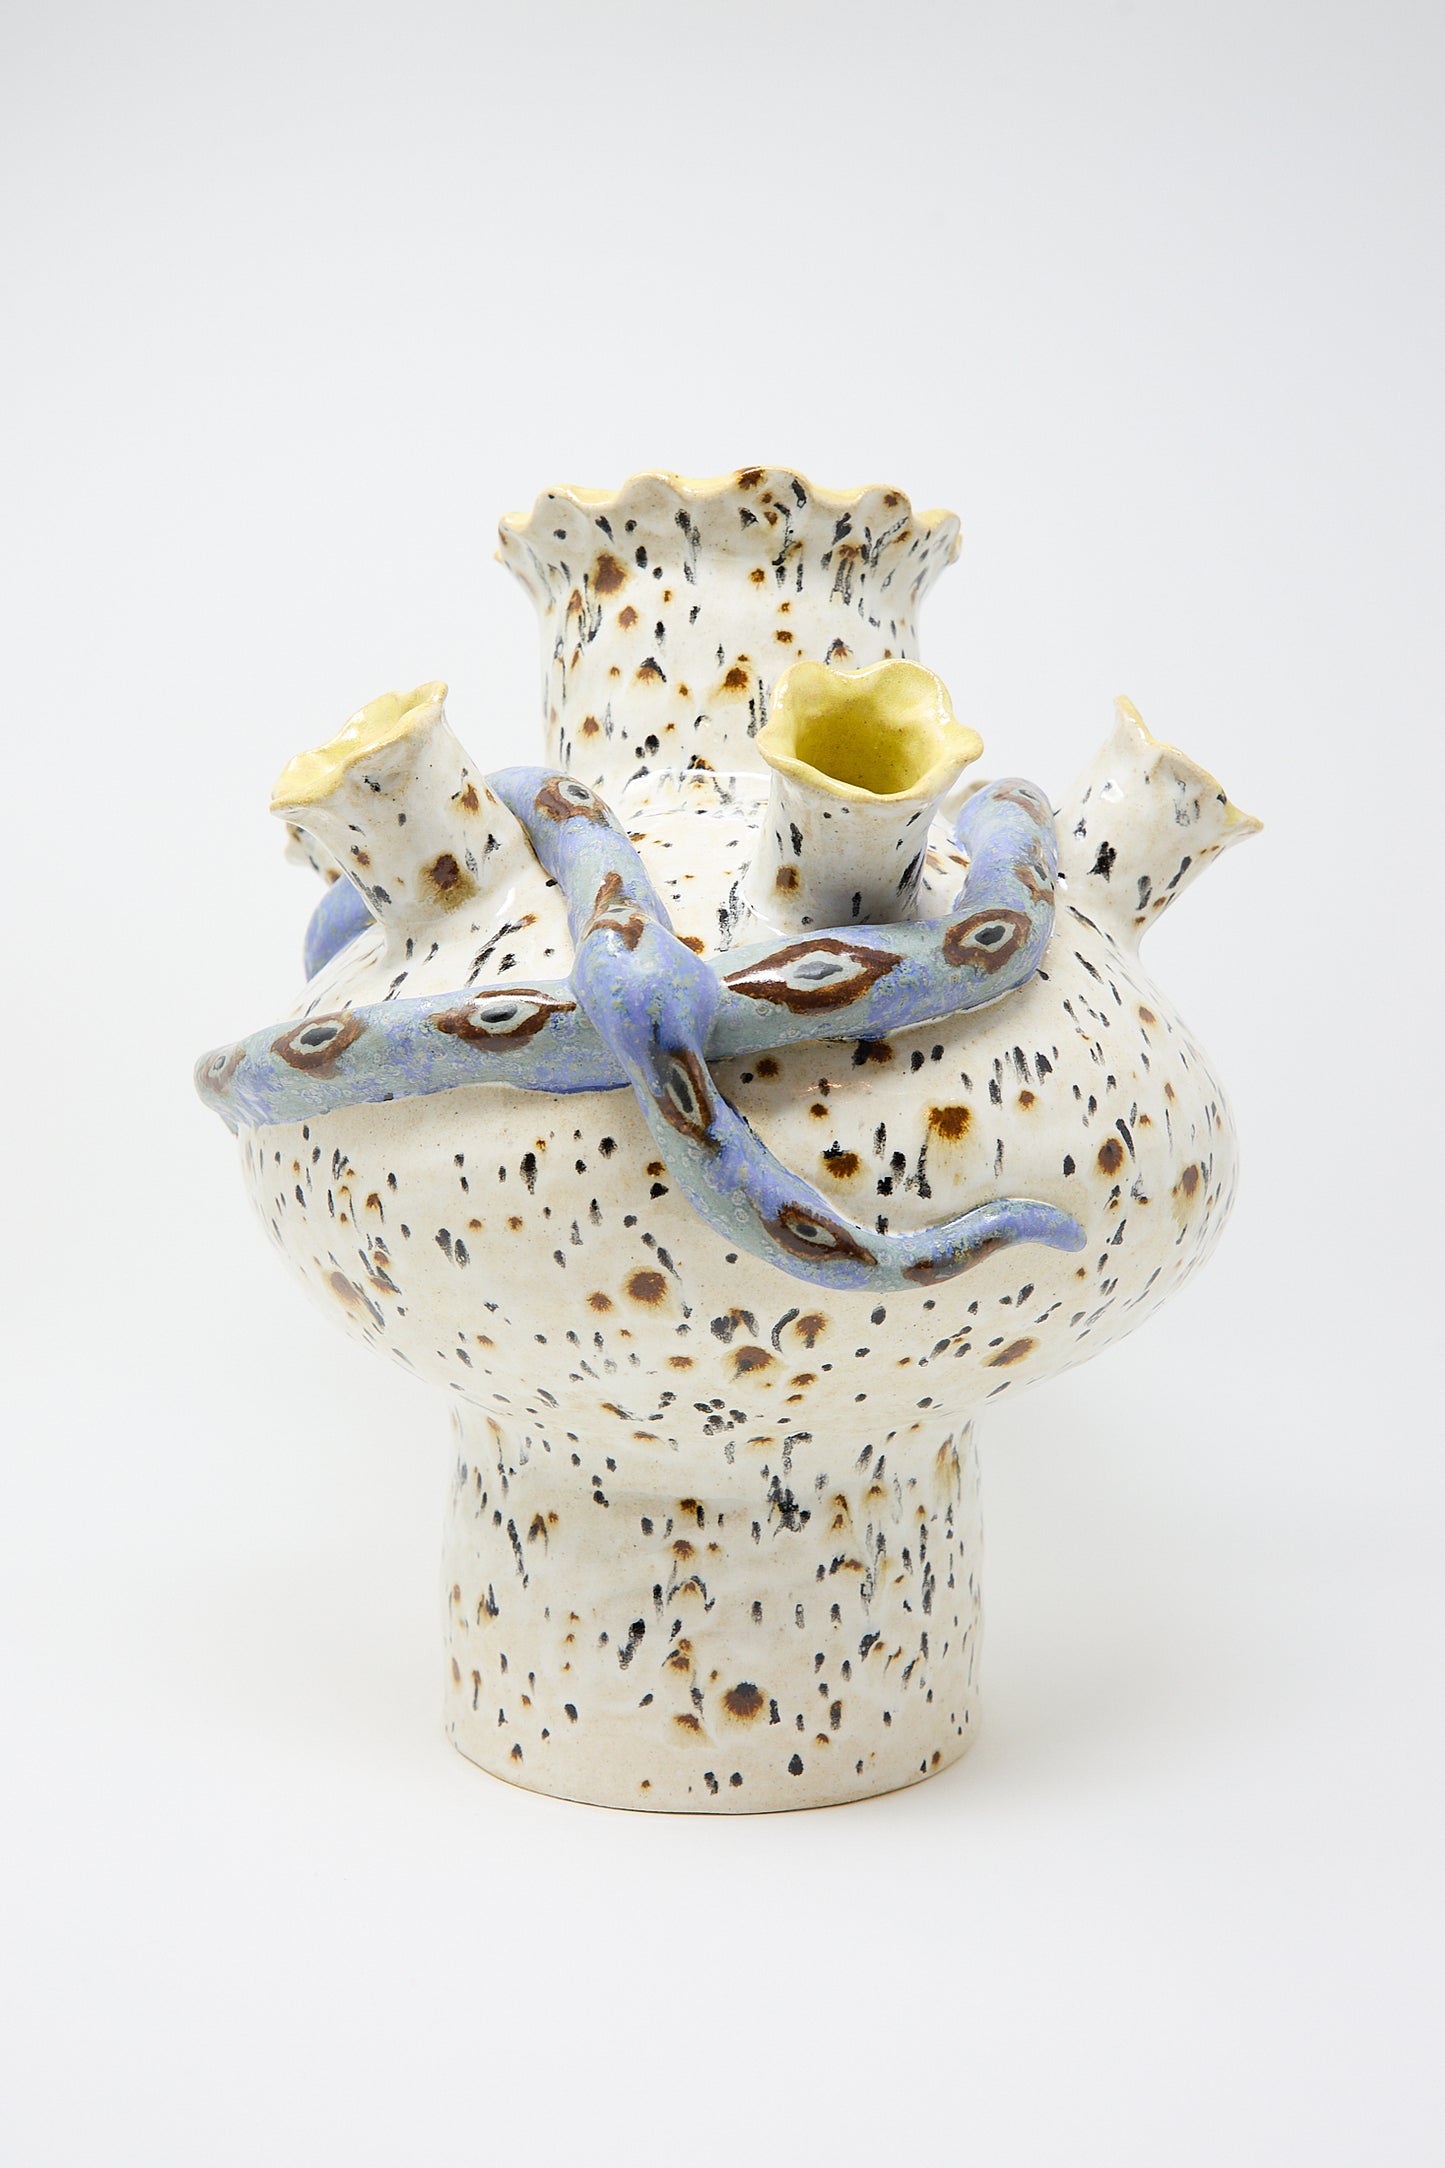 A Snake Tulipiere by Pearce Williams featuring abstract speckled design with multiple protruding, irregular openings, some adorned with blue glaze.